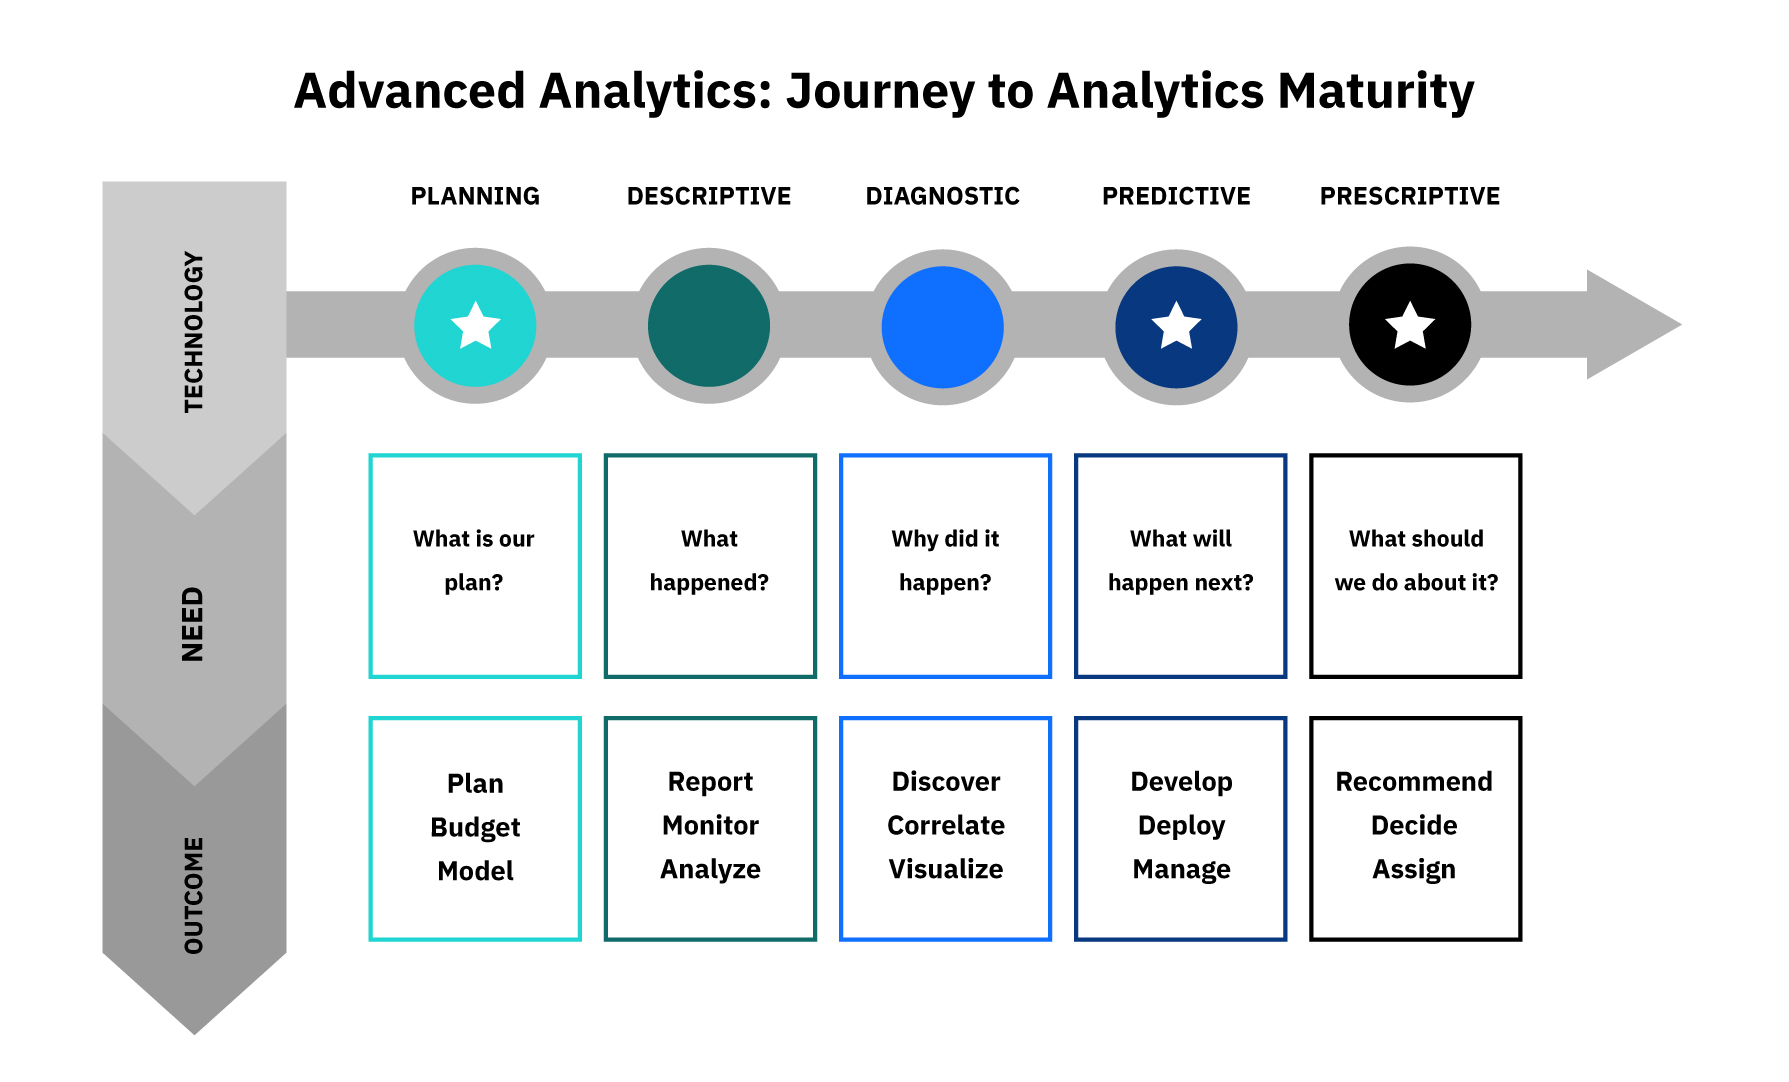 Chart that plots an organization's journey to analytics marturity, showing "technology, need, and outcome" along the y axia, and "planning, descriptive, diagnostic, predictive, and prescriptive" across the x axis. Within the chart, needs are outline and the outcomes of each x axis variable are answered.